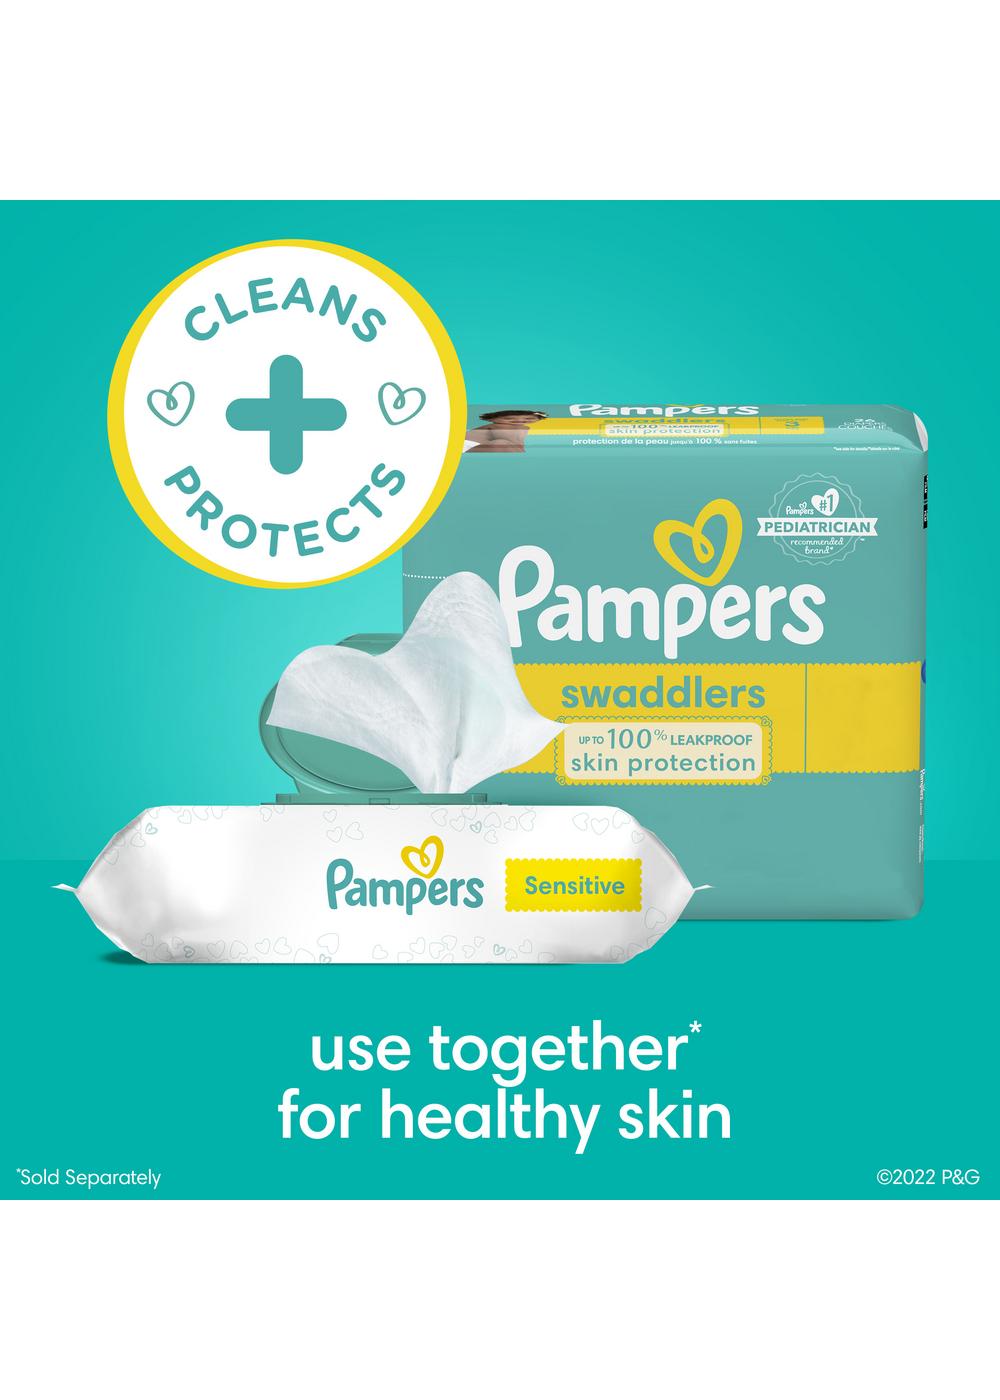 Pampers Sensitive Skin Baby Wipes 7 Pk; image 2 of 9